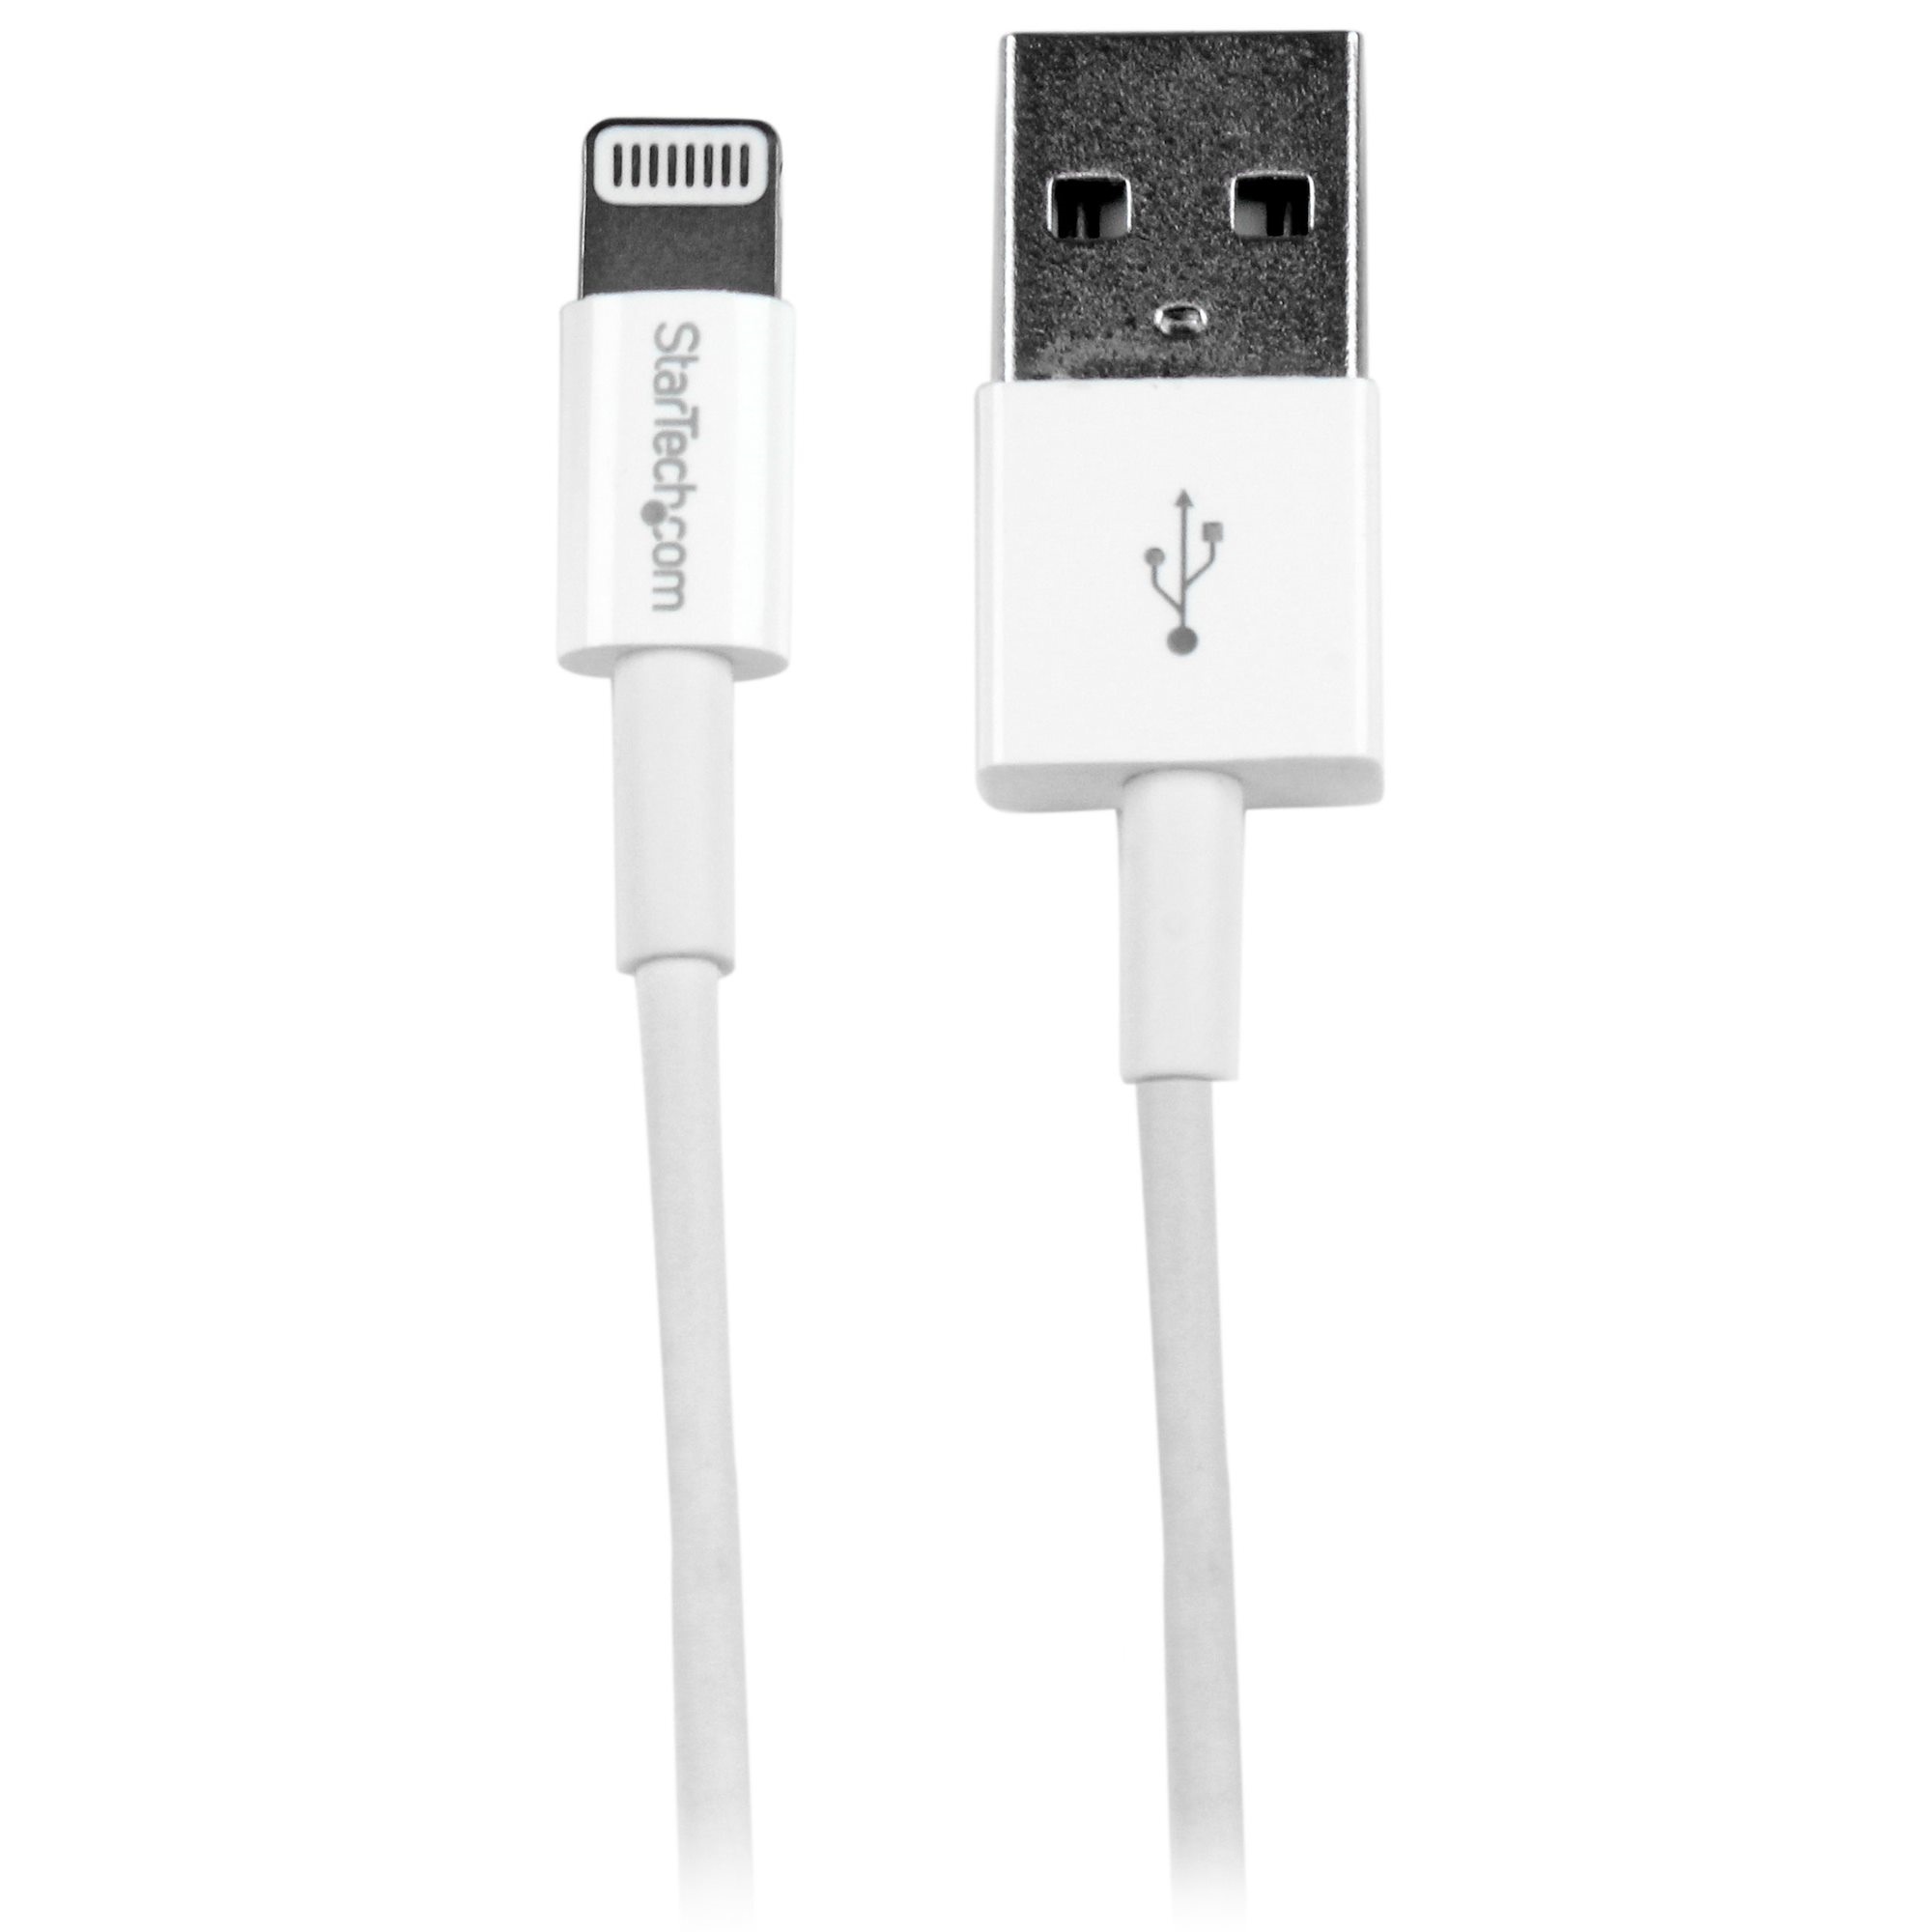 StarTech Slim Lightning to USB Cable (White, 1m)